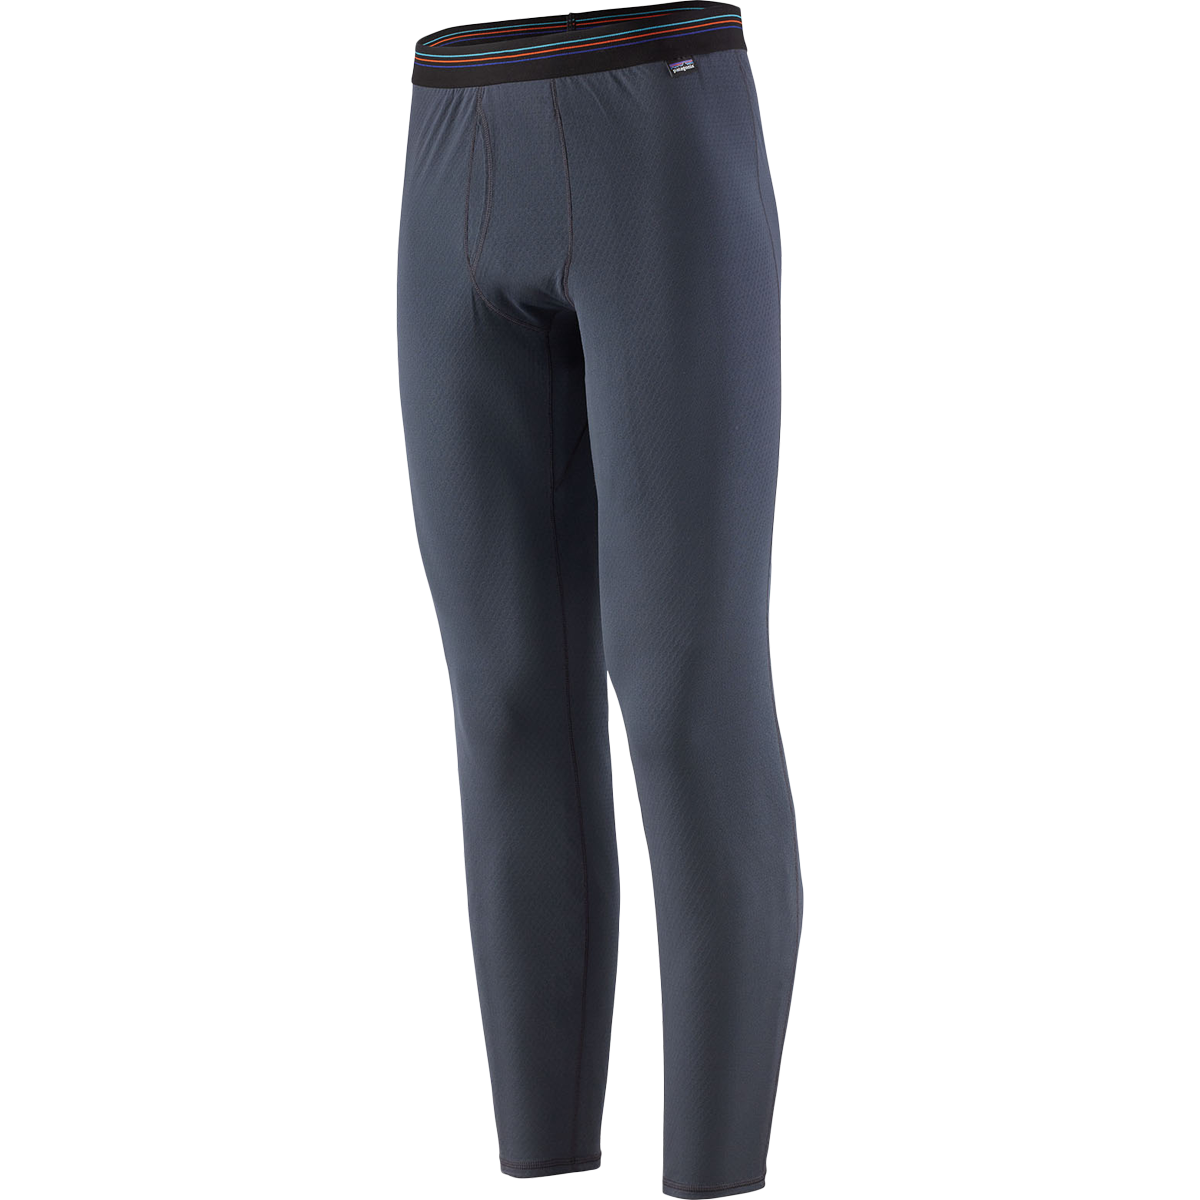  90 Degree By Reflex High Waist Fleece Lined Leggings with Side  Pocket - Yoga Pants - Poseidon with Pocket - Large : Clothing, Shoes &  Jewelry